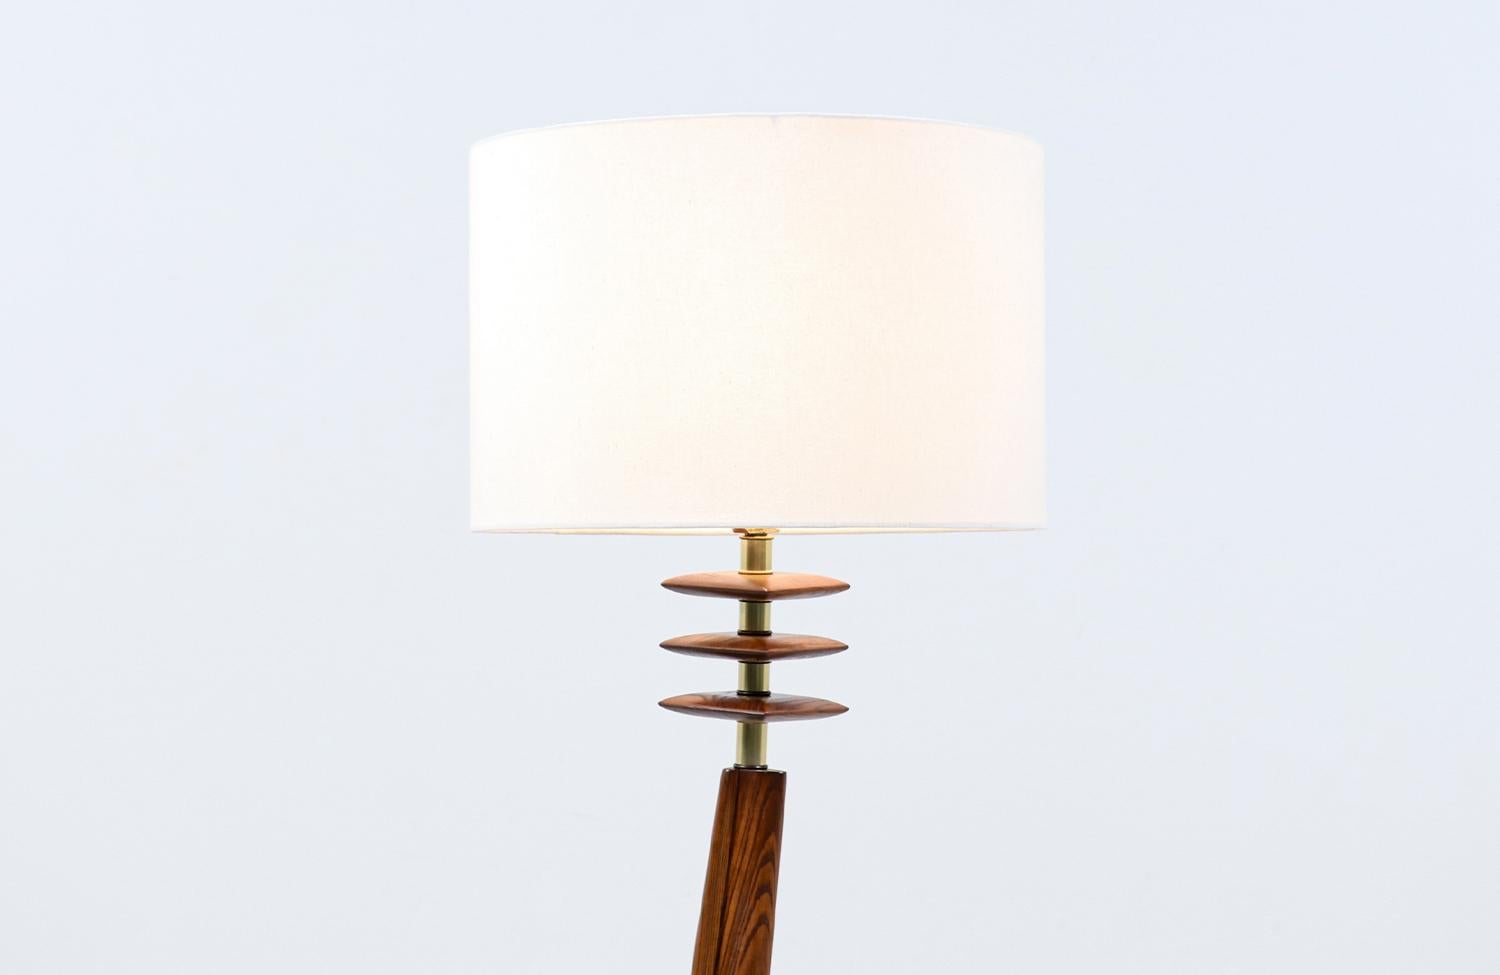  Expertly Restored - Mid-Century Modern Sculpted Floor Lamp with Brass Accents In Excellent Condition For Sale In Los Angeles, CA